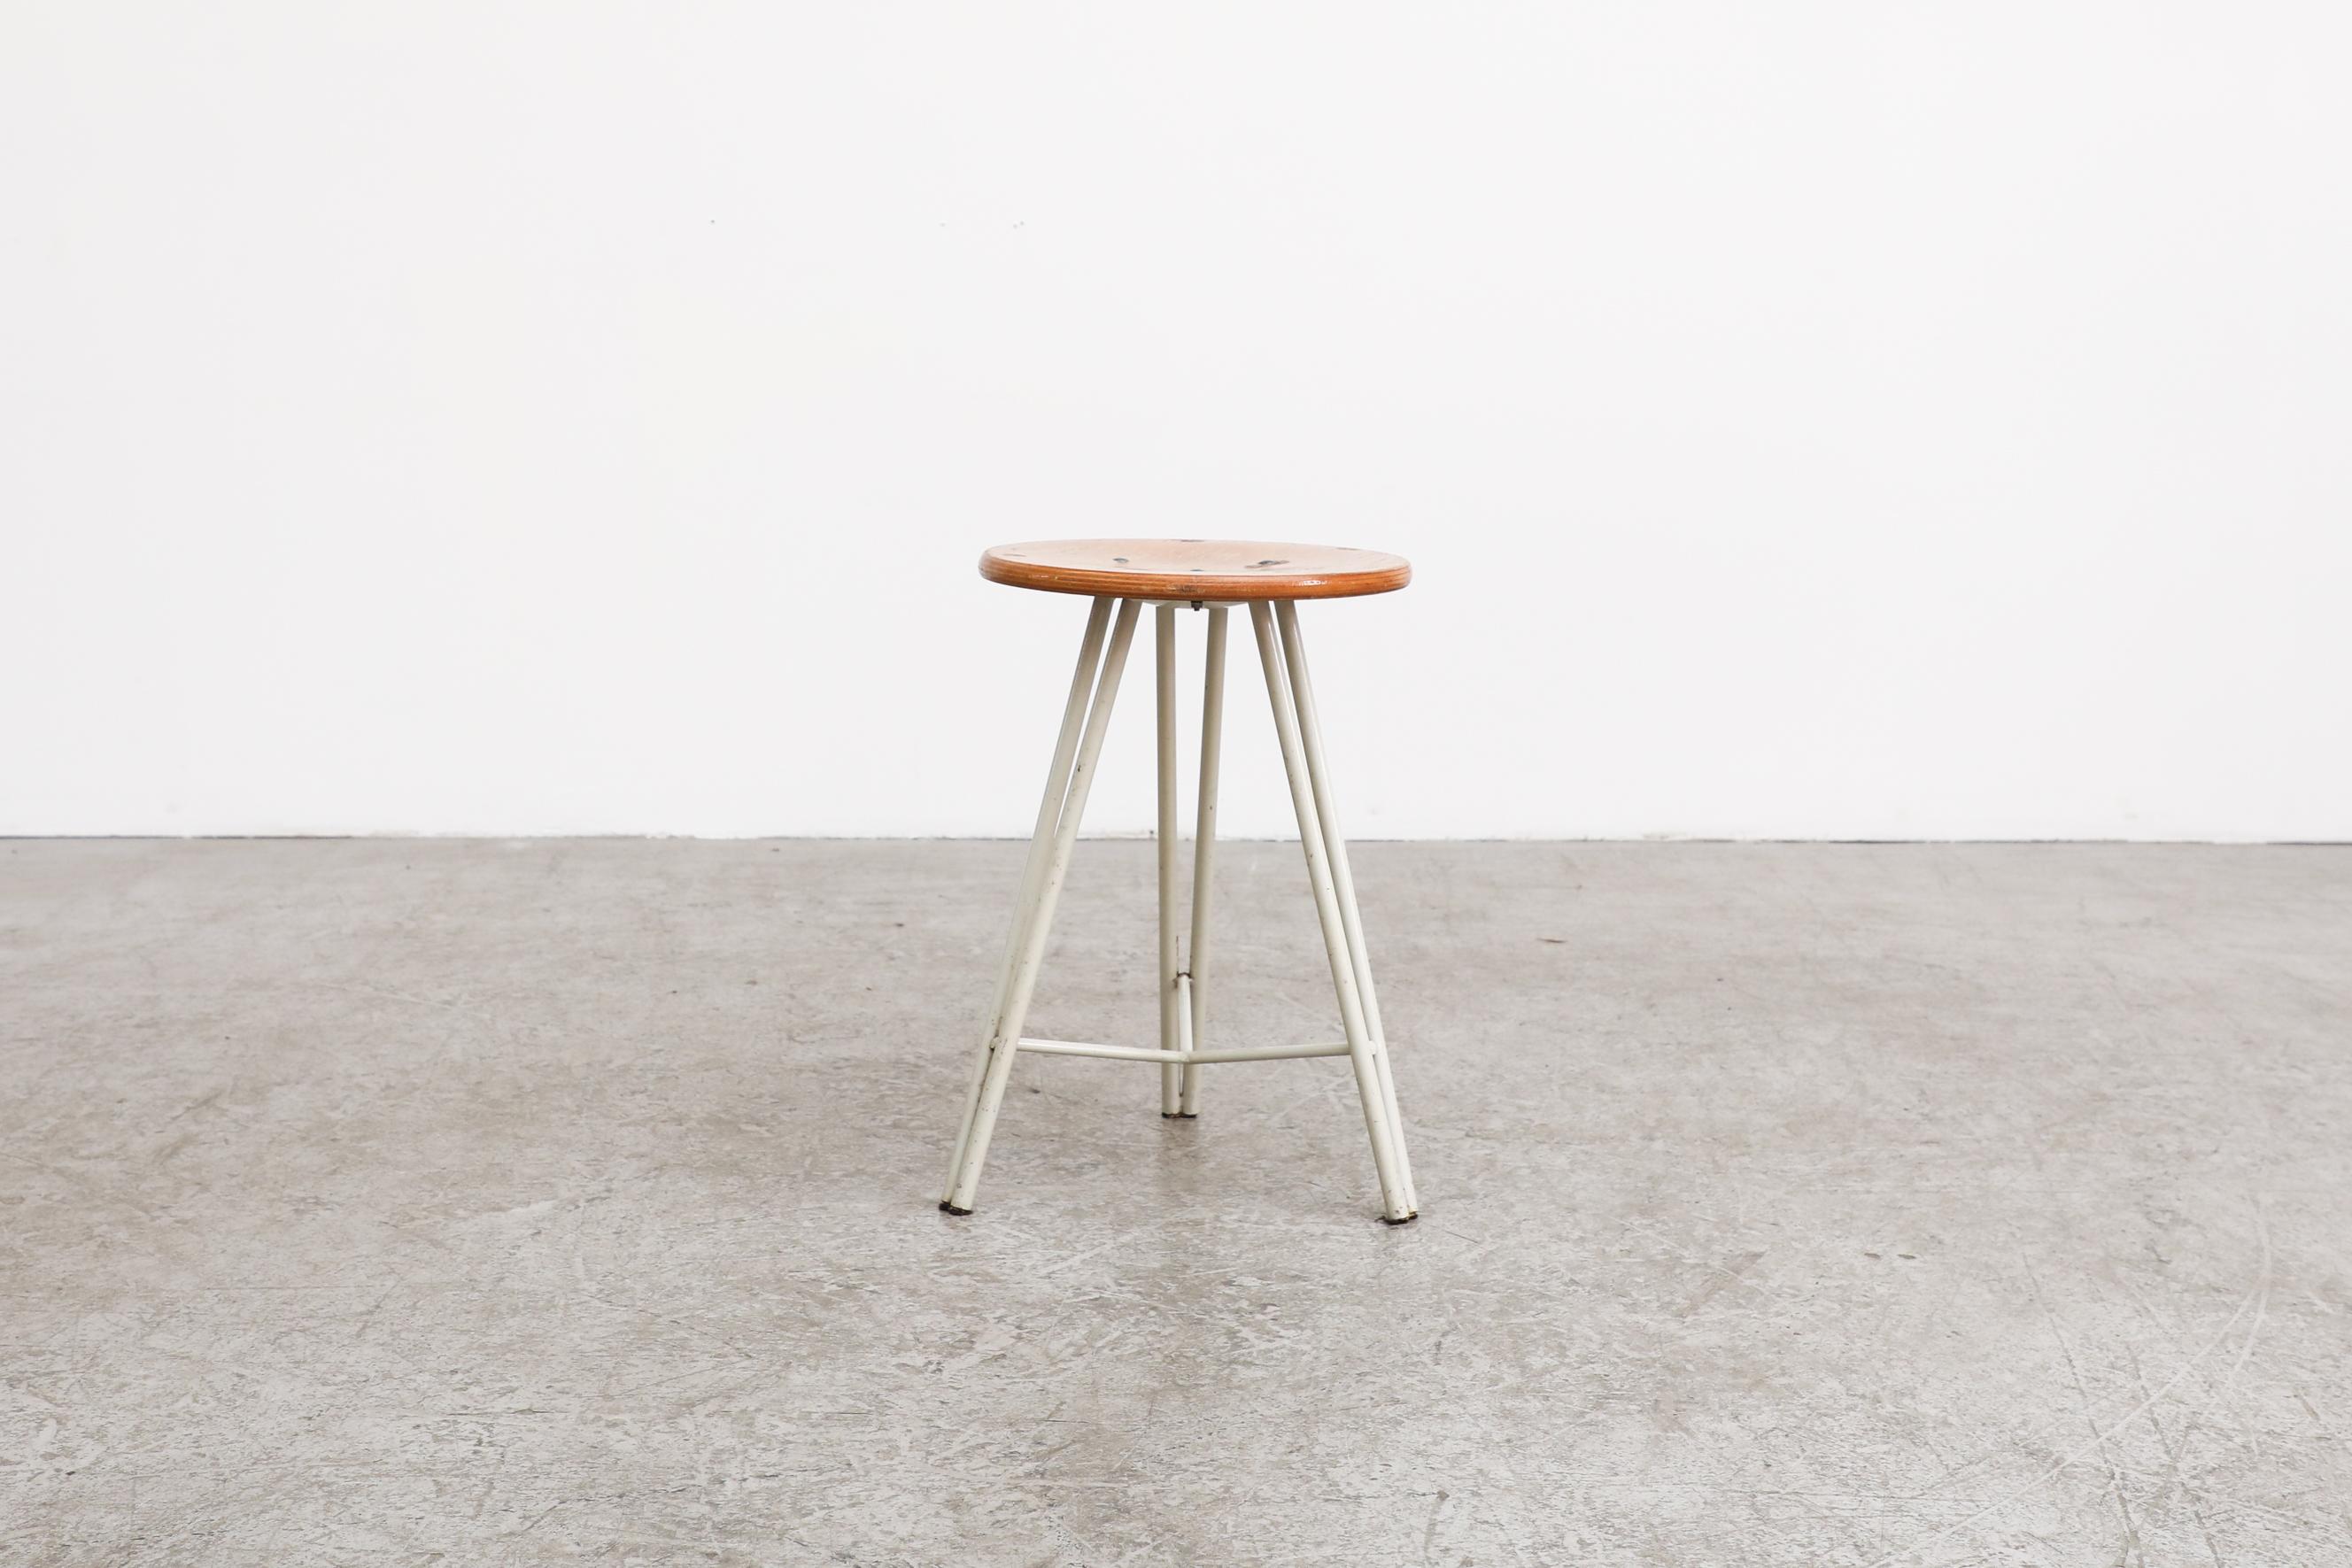 Little tripod task stool with white enameled legs with a plywood round seat. In original condition with visible wear, consistent with its age and use.